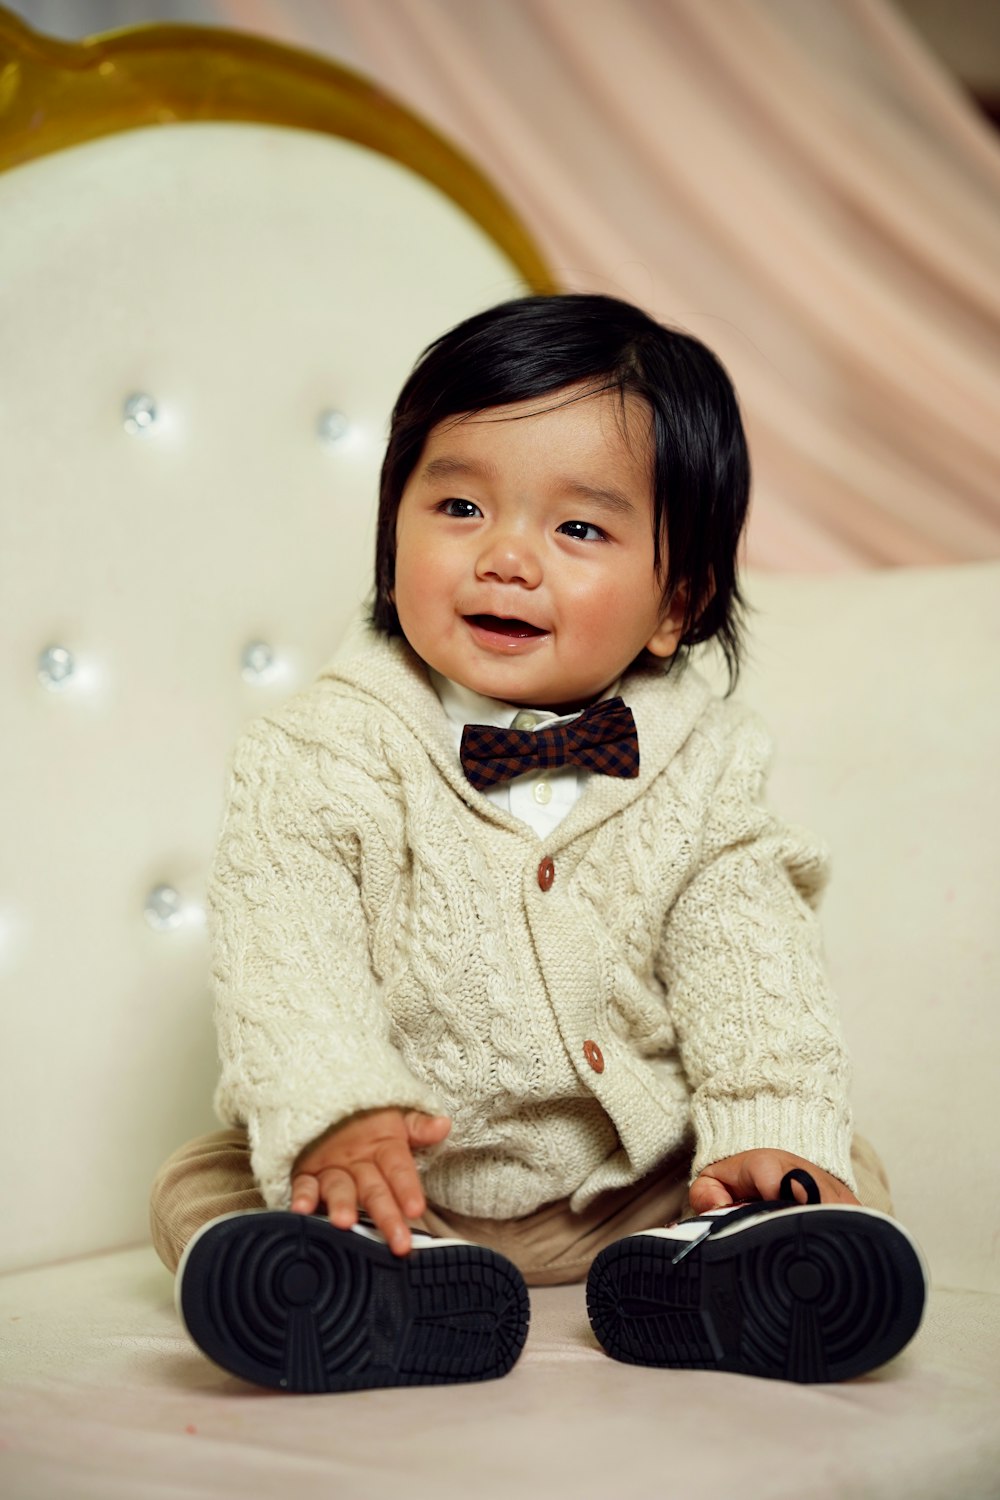 a baby wearing a bow tie sitting on a white chair